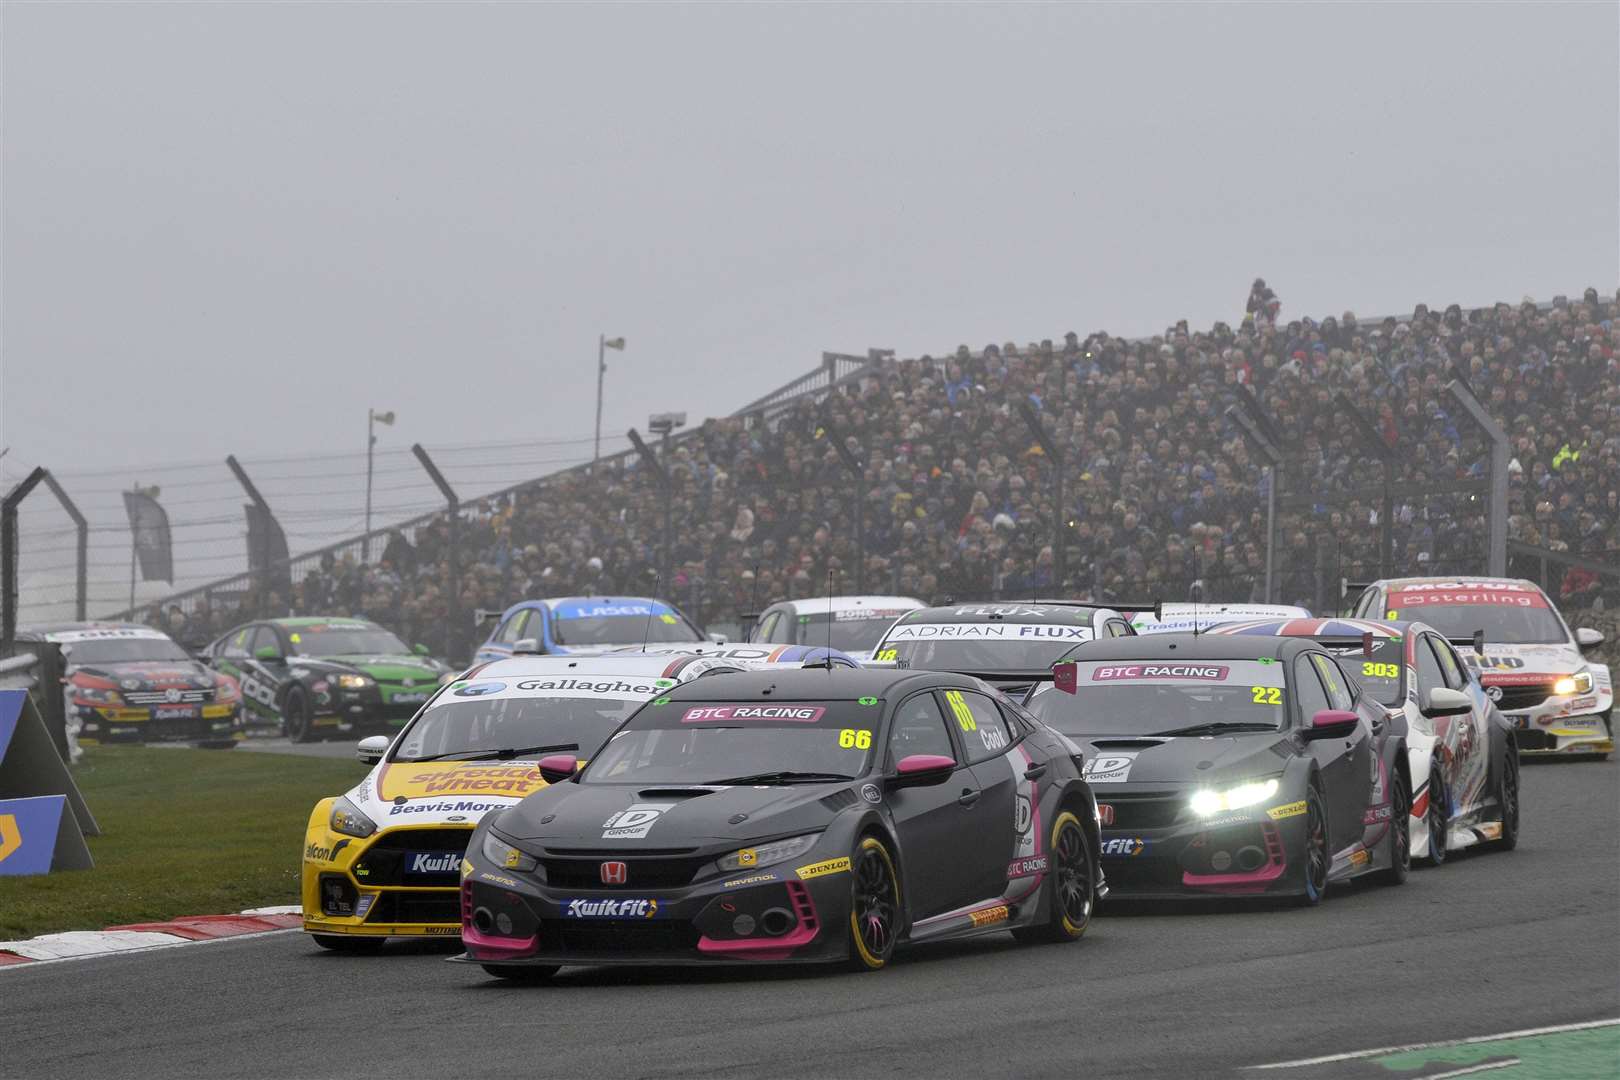 Race one start during last season's visit of the British Touring Car Championship